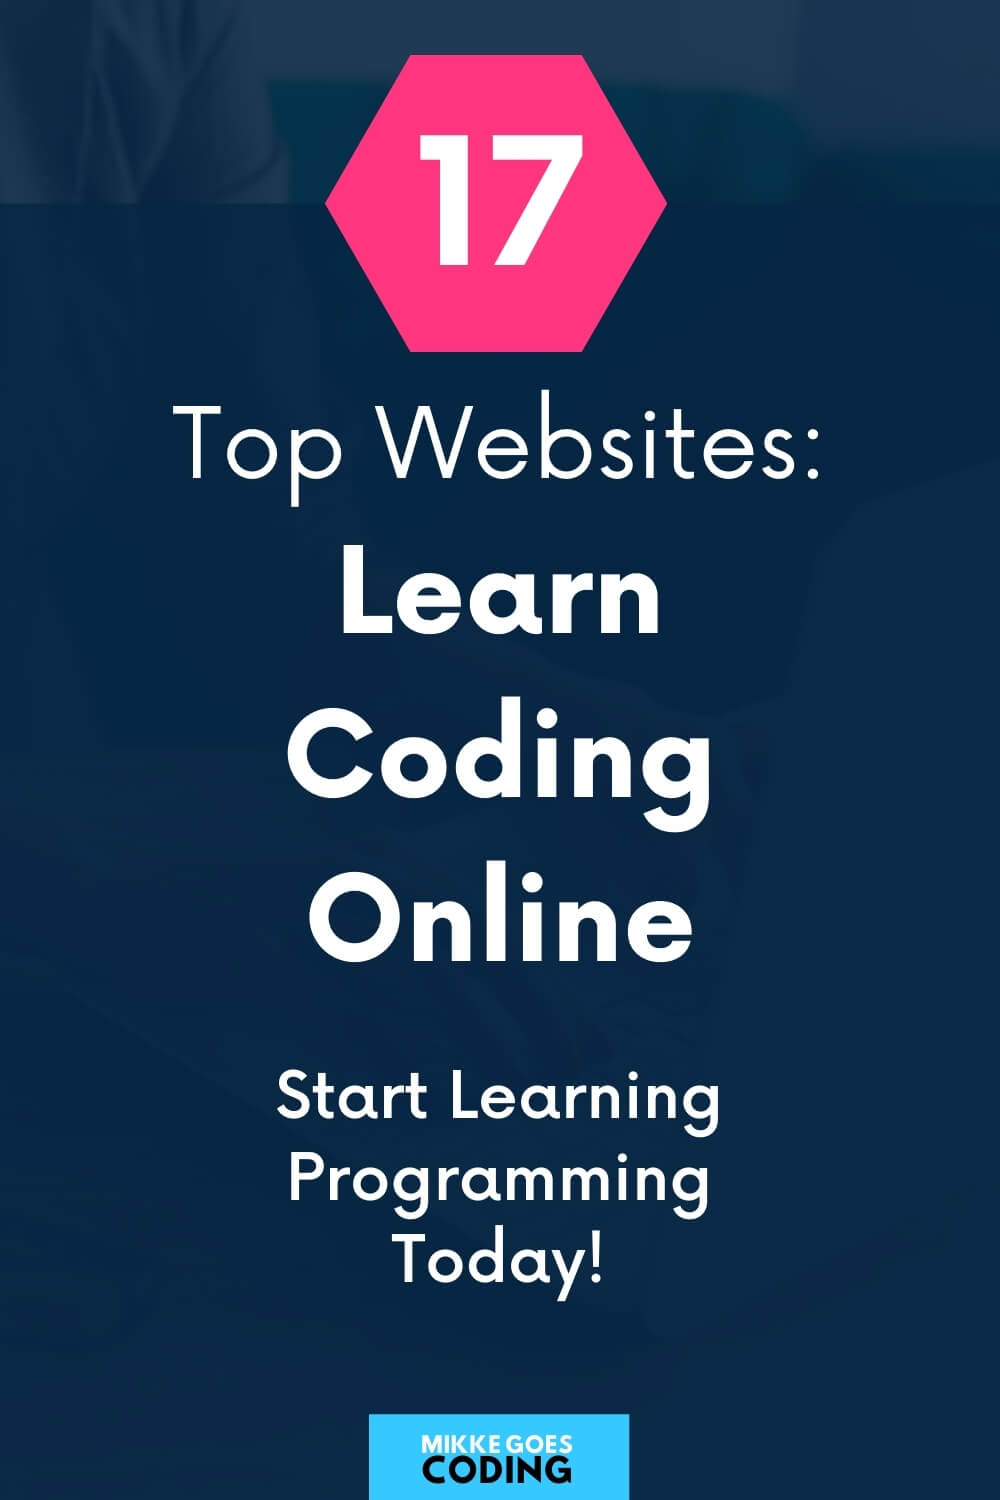 The best websites to learn coding for beginners